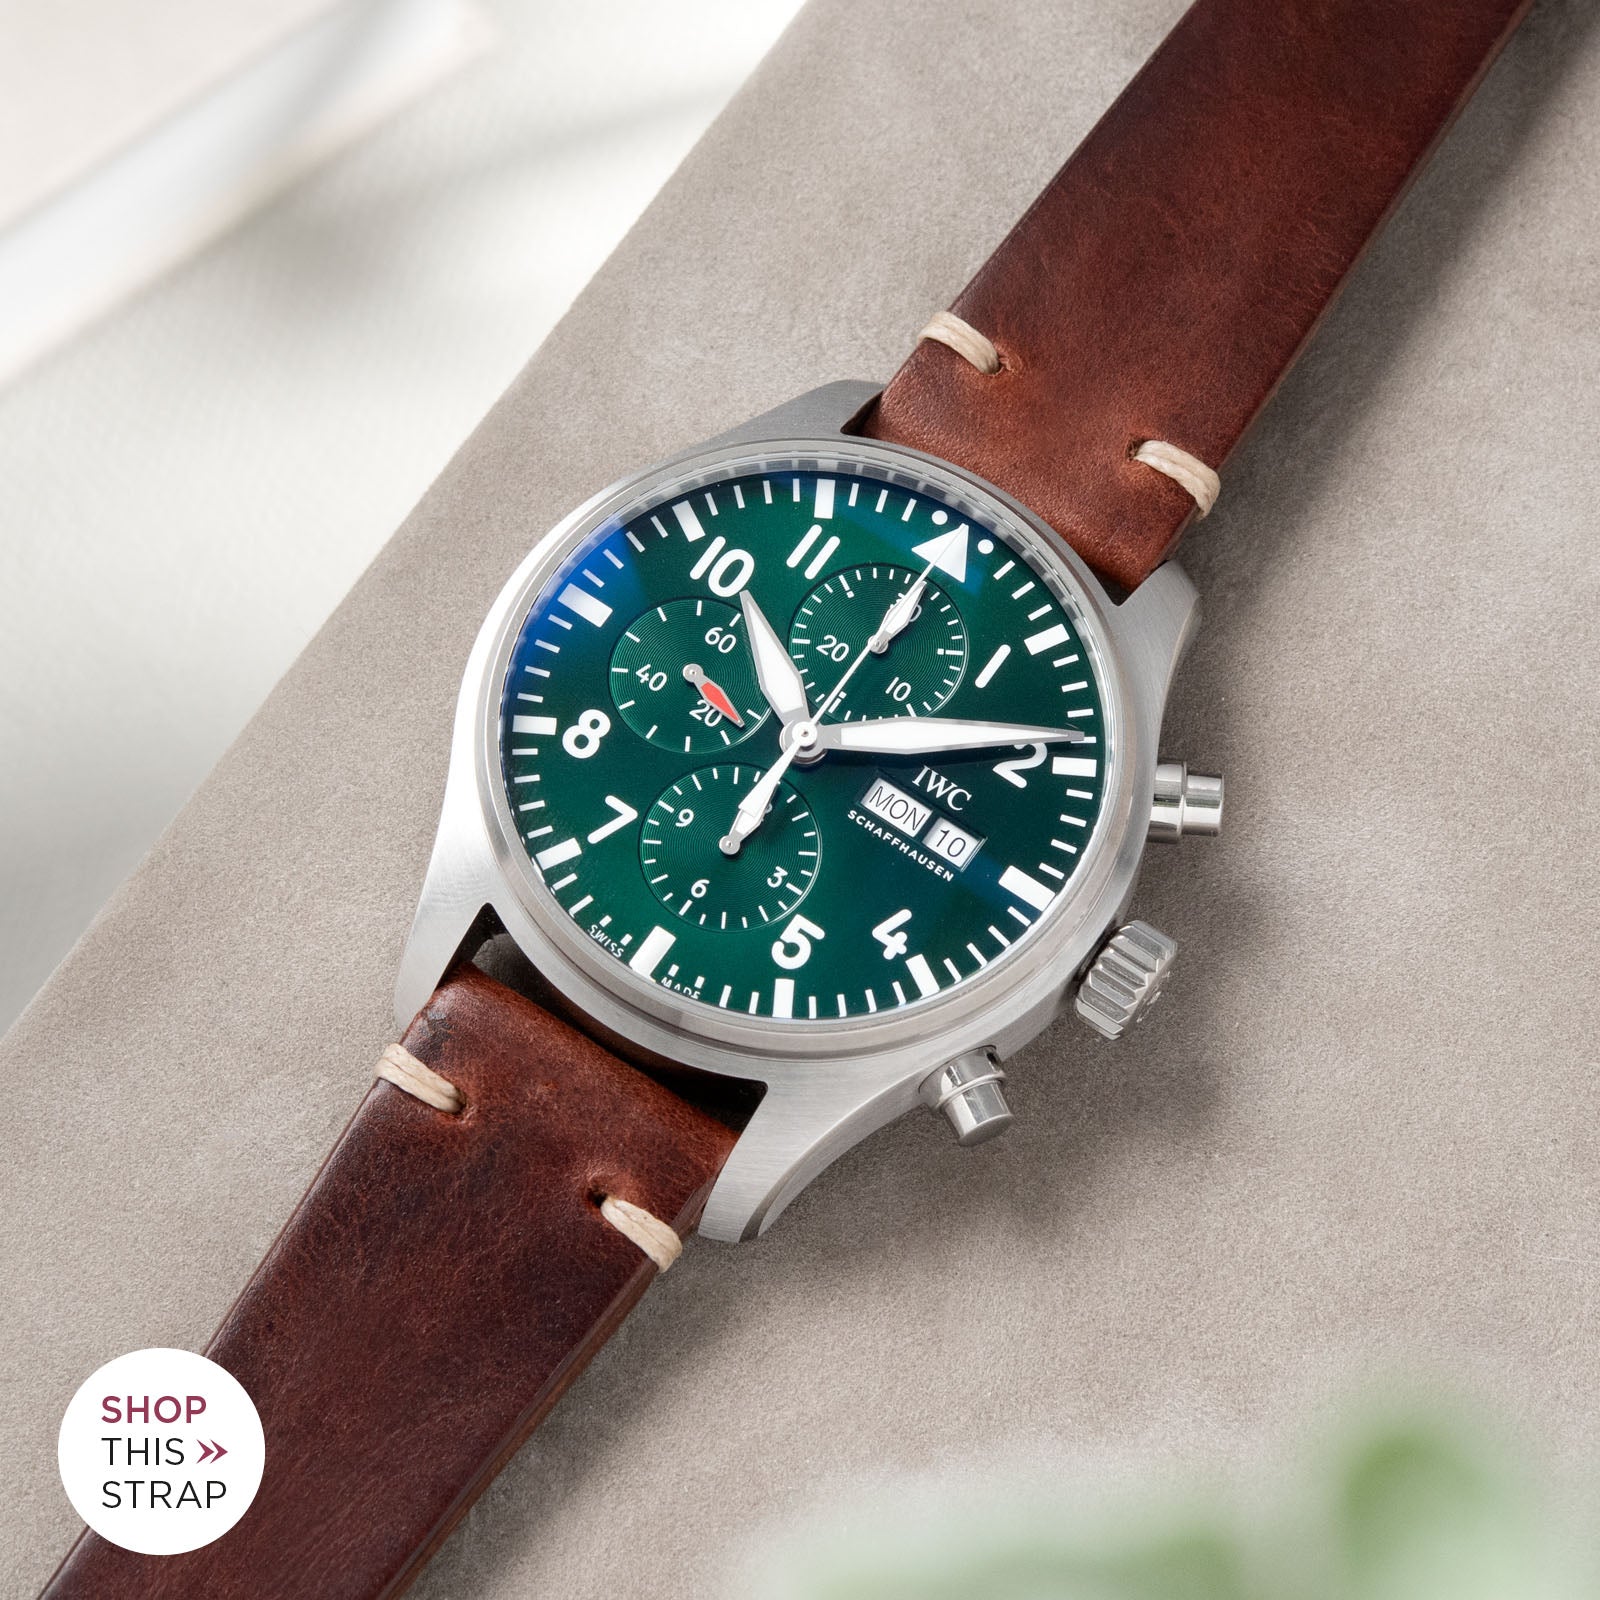 Bulang and Sons_Strap Guide_The IWC Spitfire Pilot's Chronograph Watch_Siena Brown Leather Watch Strap